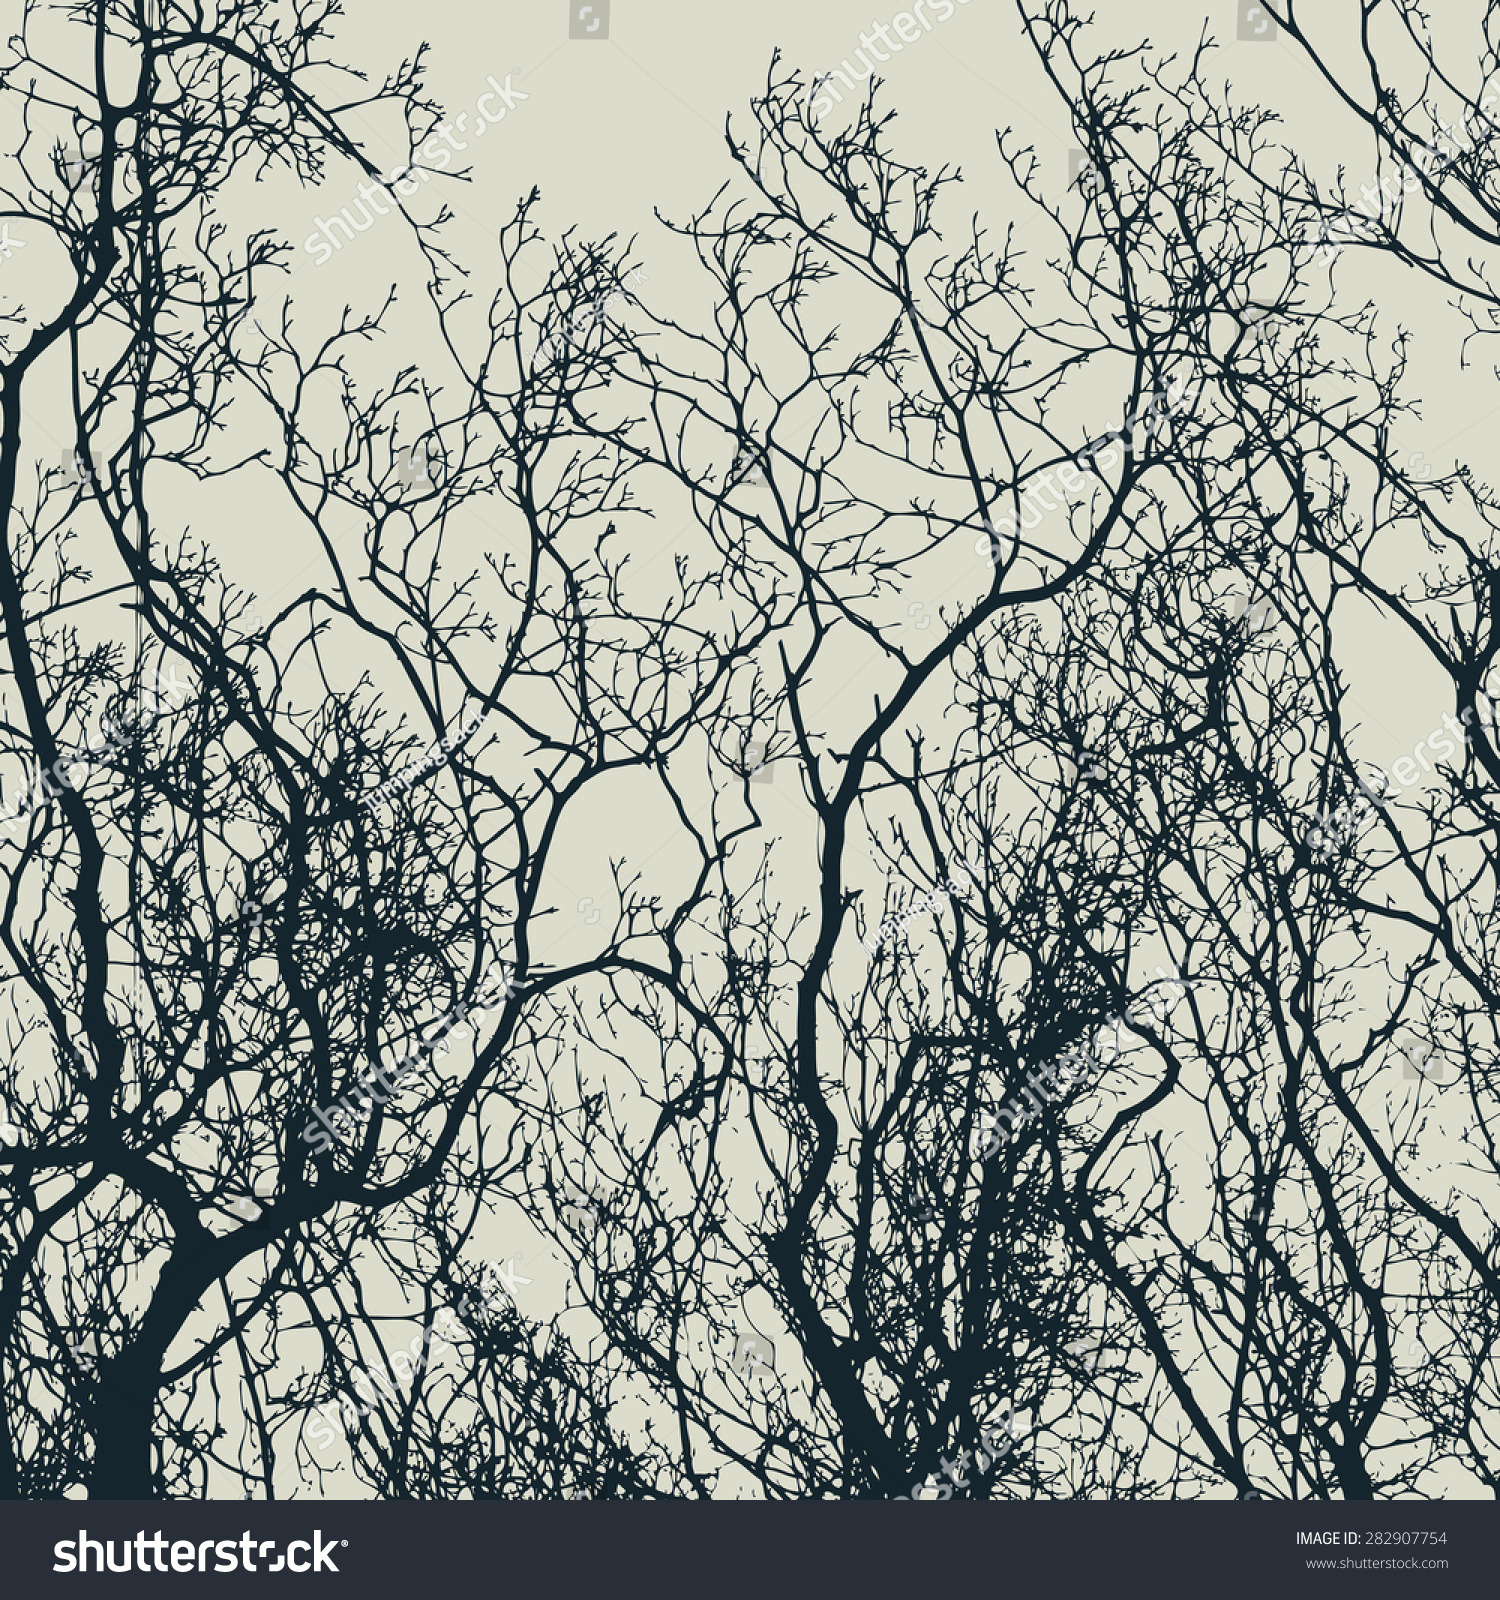 Branches Silhouette. Detailed Vector Illustration - 282907754